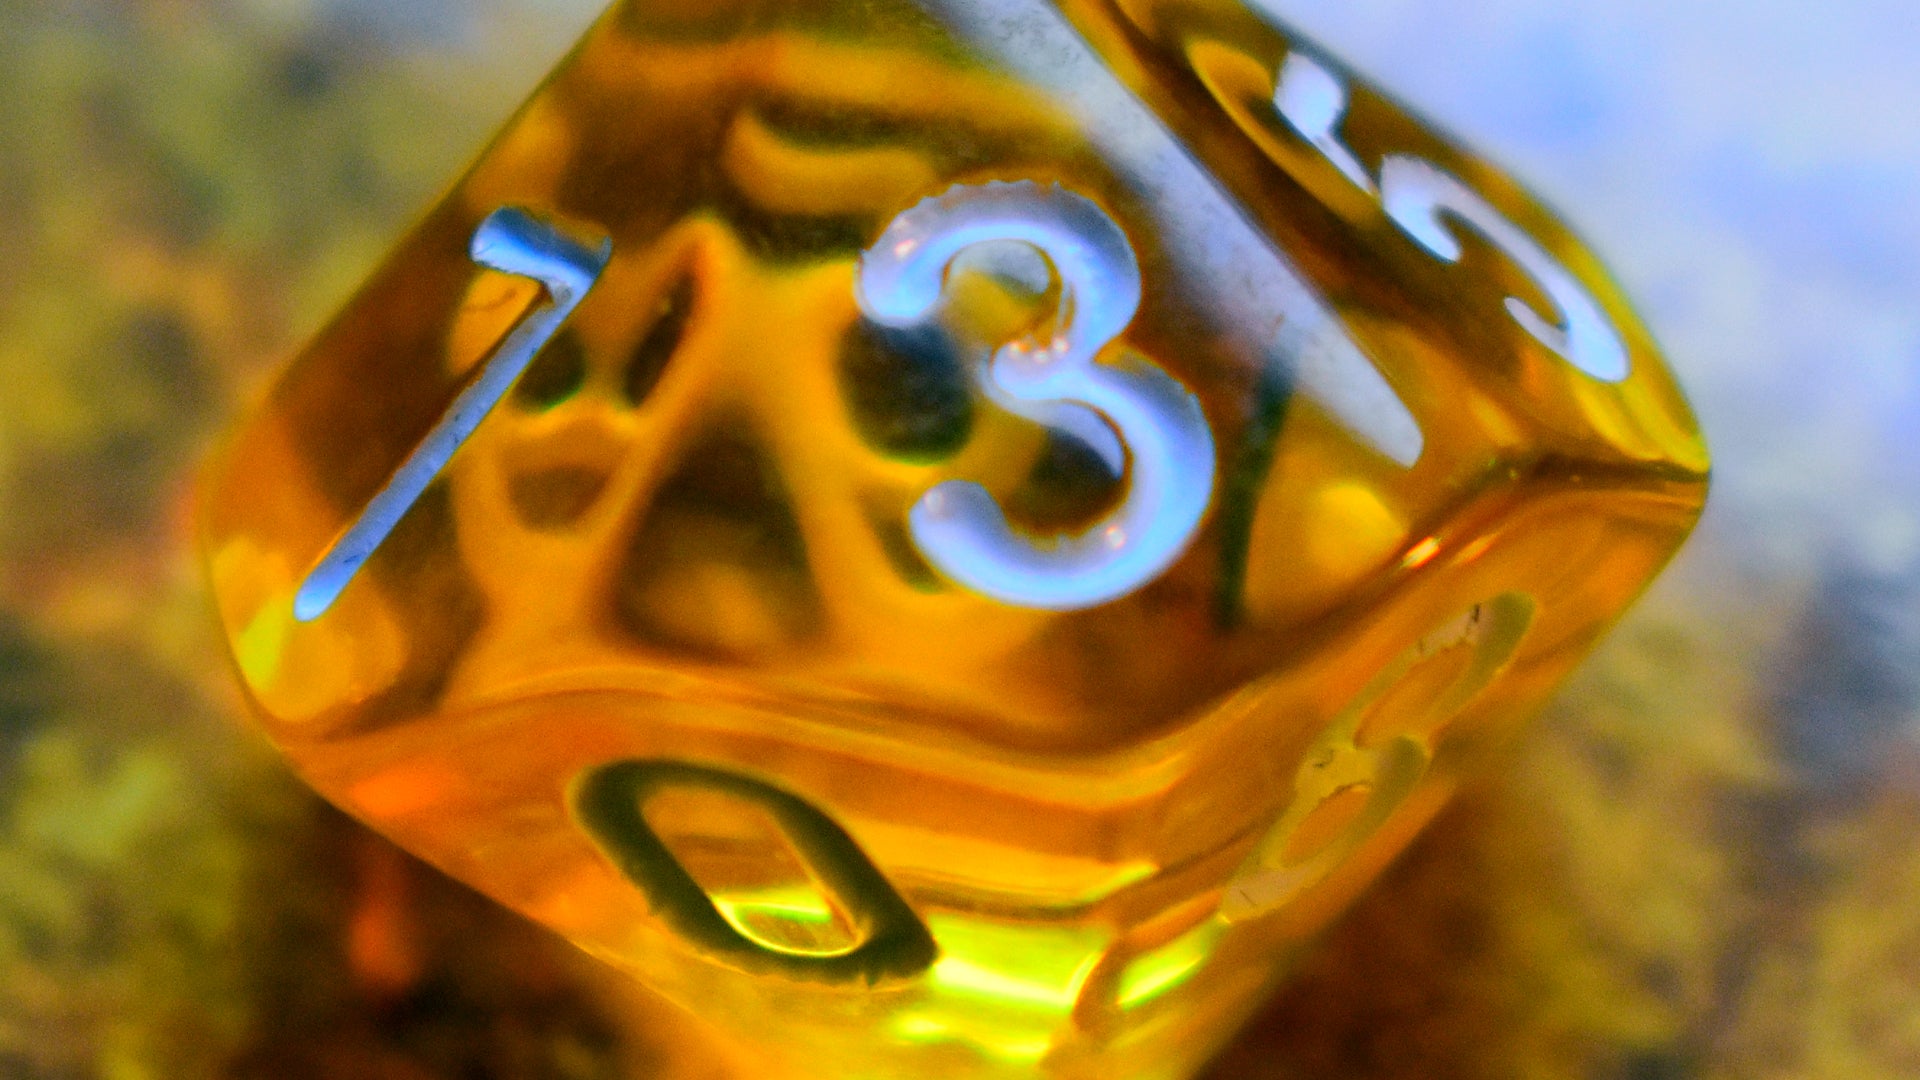 d10 ten-sided die showing 3 result close-up